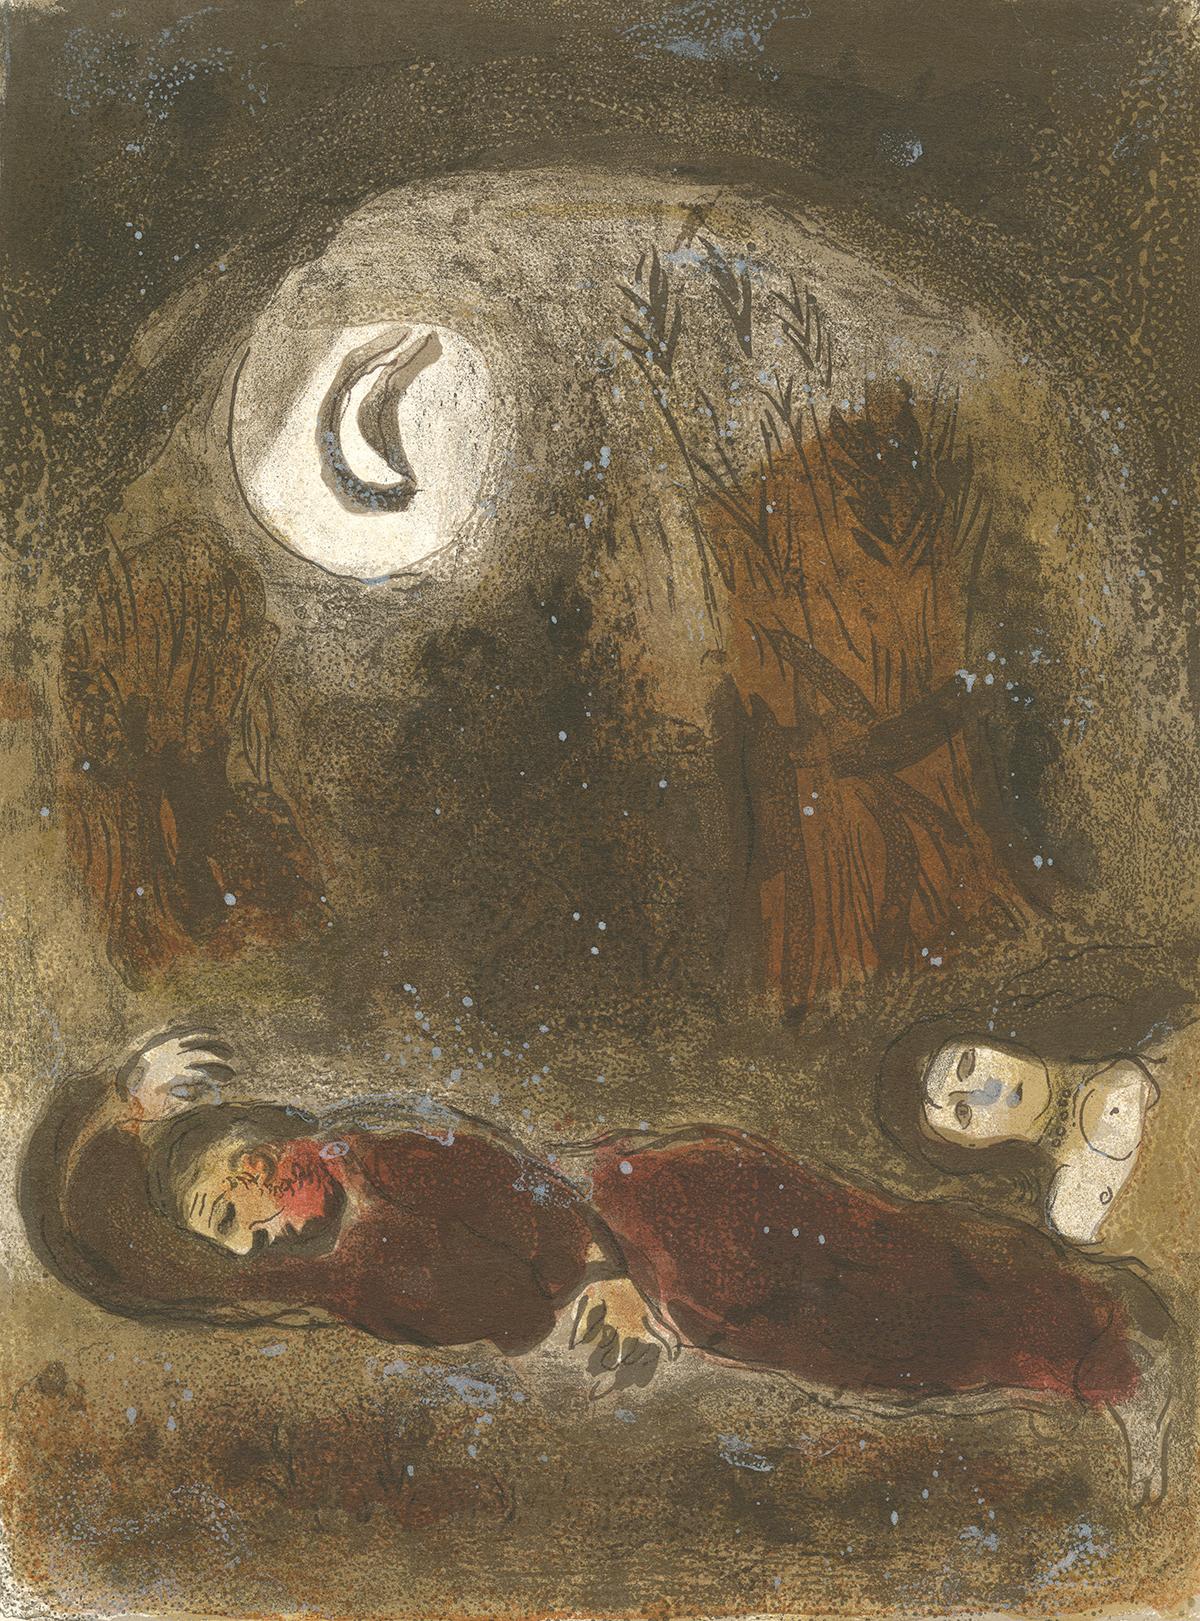 Marc Chagall Figurative Print - 20th century color lithograph dark brown reclined sleeping figures moon